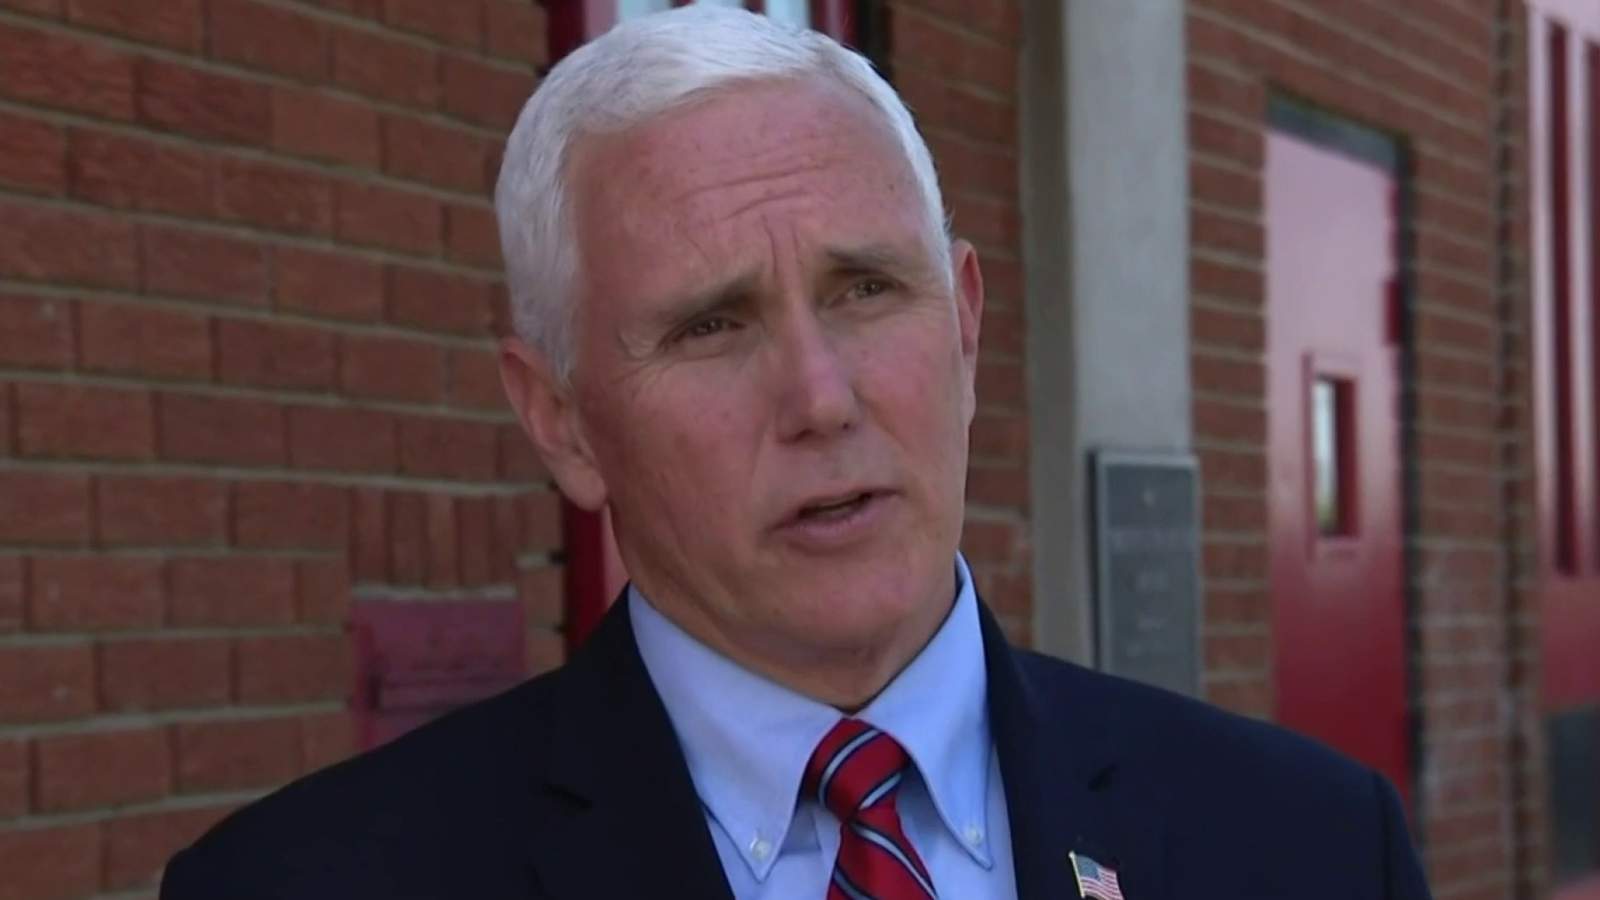 Vice President Mike Pence visits Macomb County